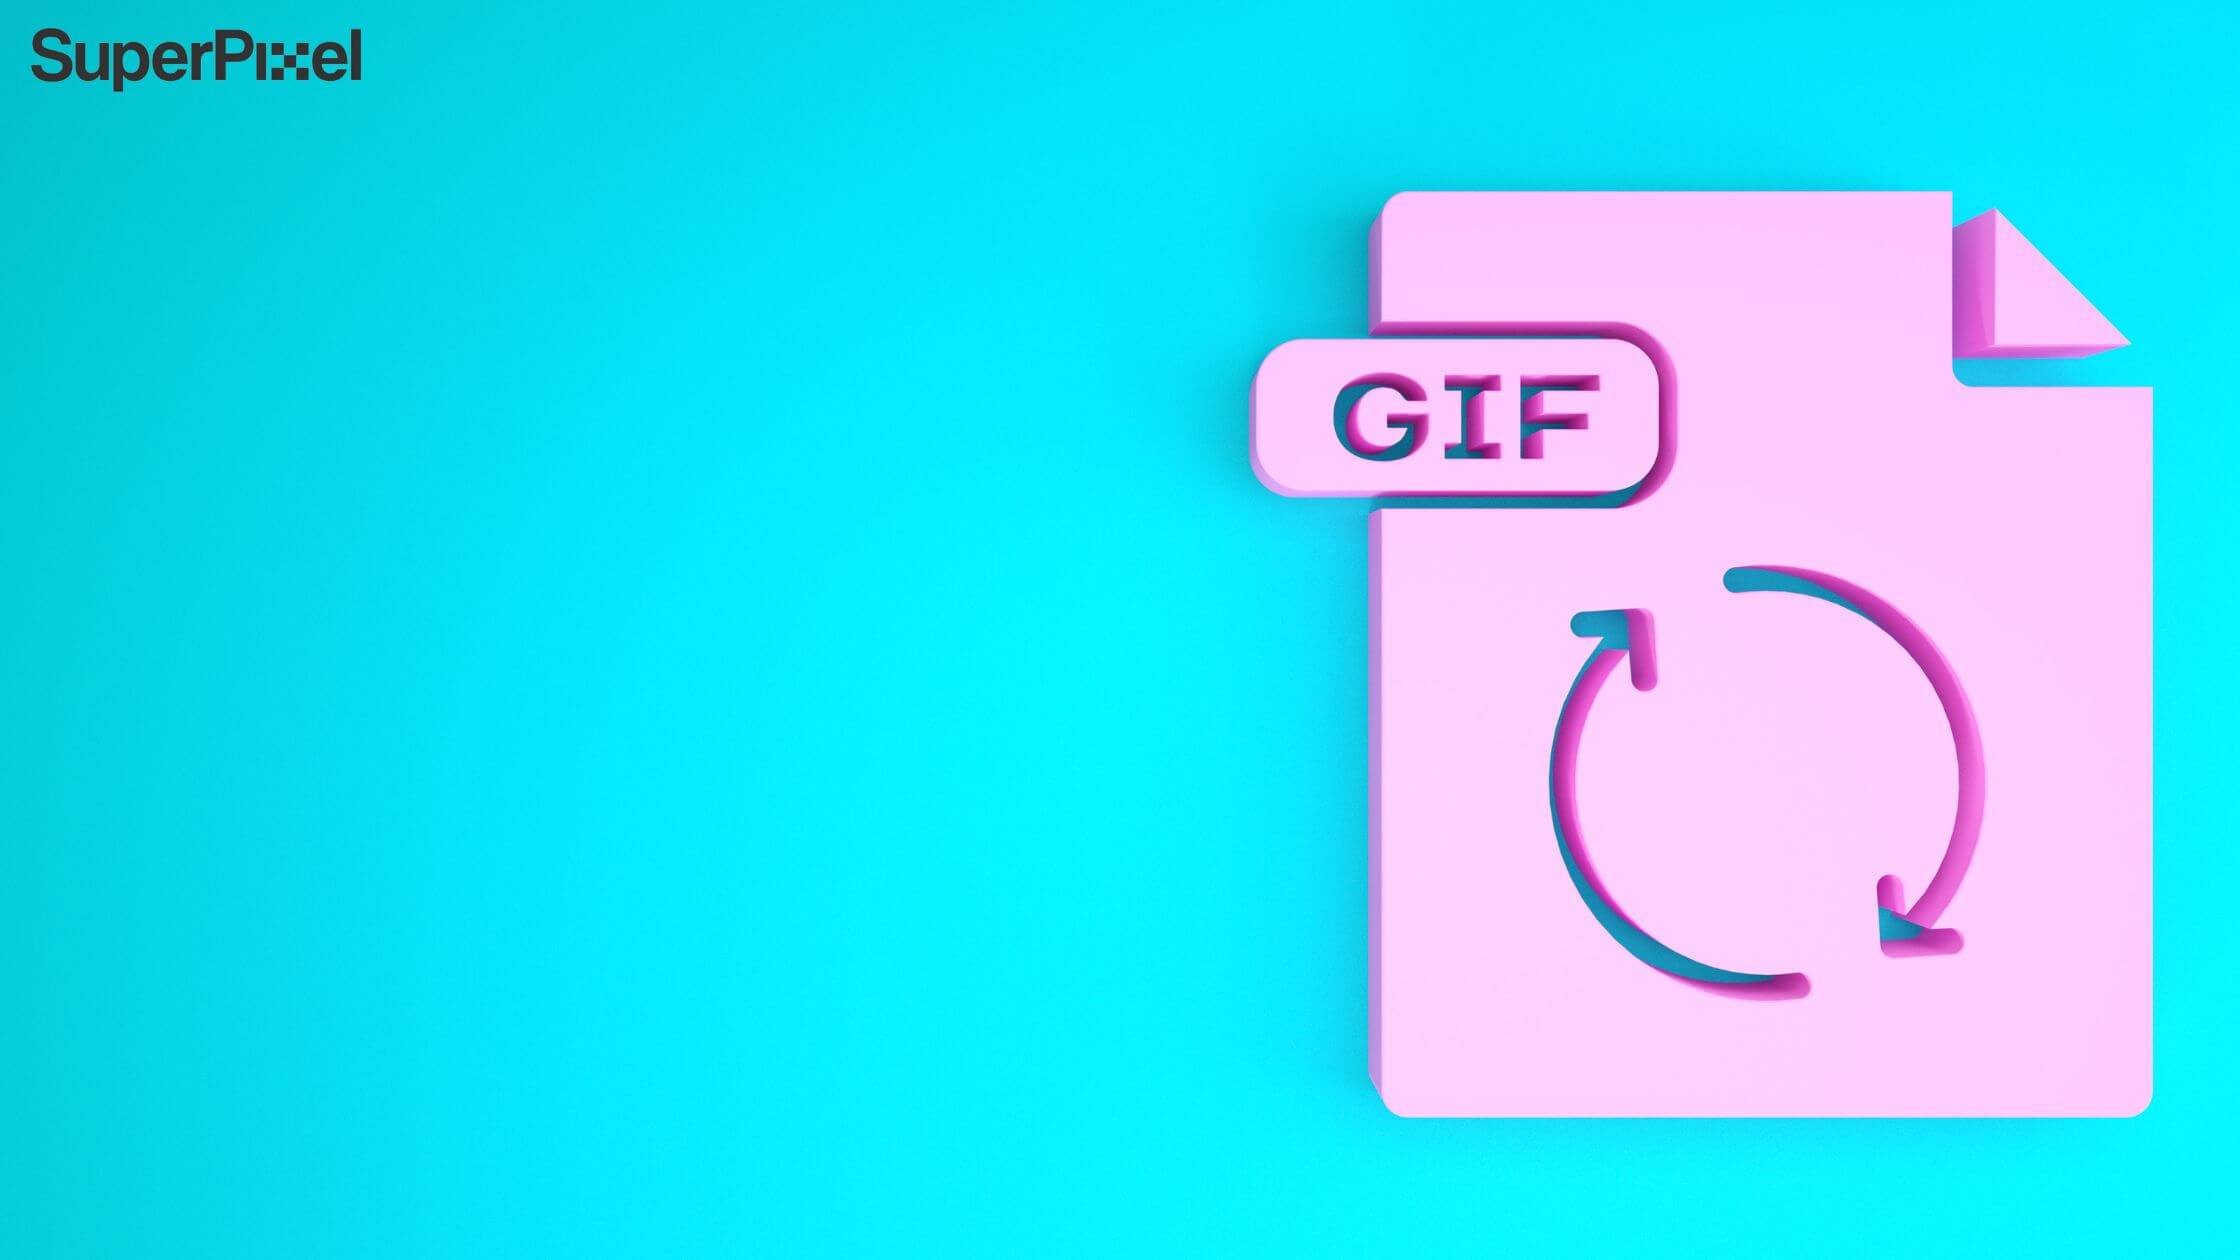 What Should You Know When Making a GIF?